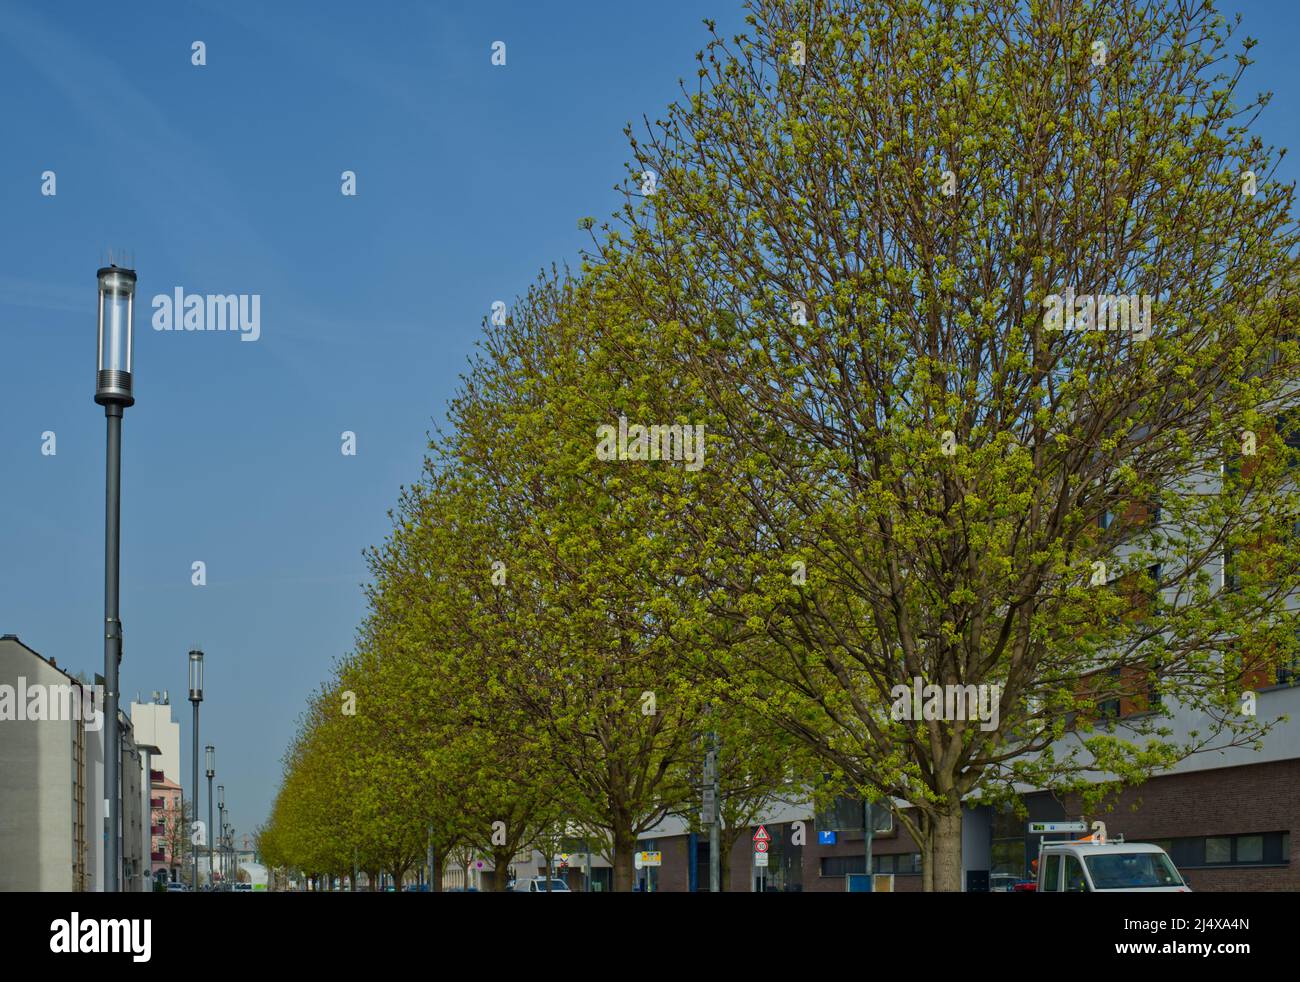 perspective of a row of street lamps on the left and fresh green trees on the right in an urban area Stock Photo